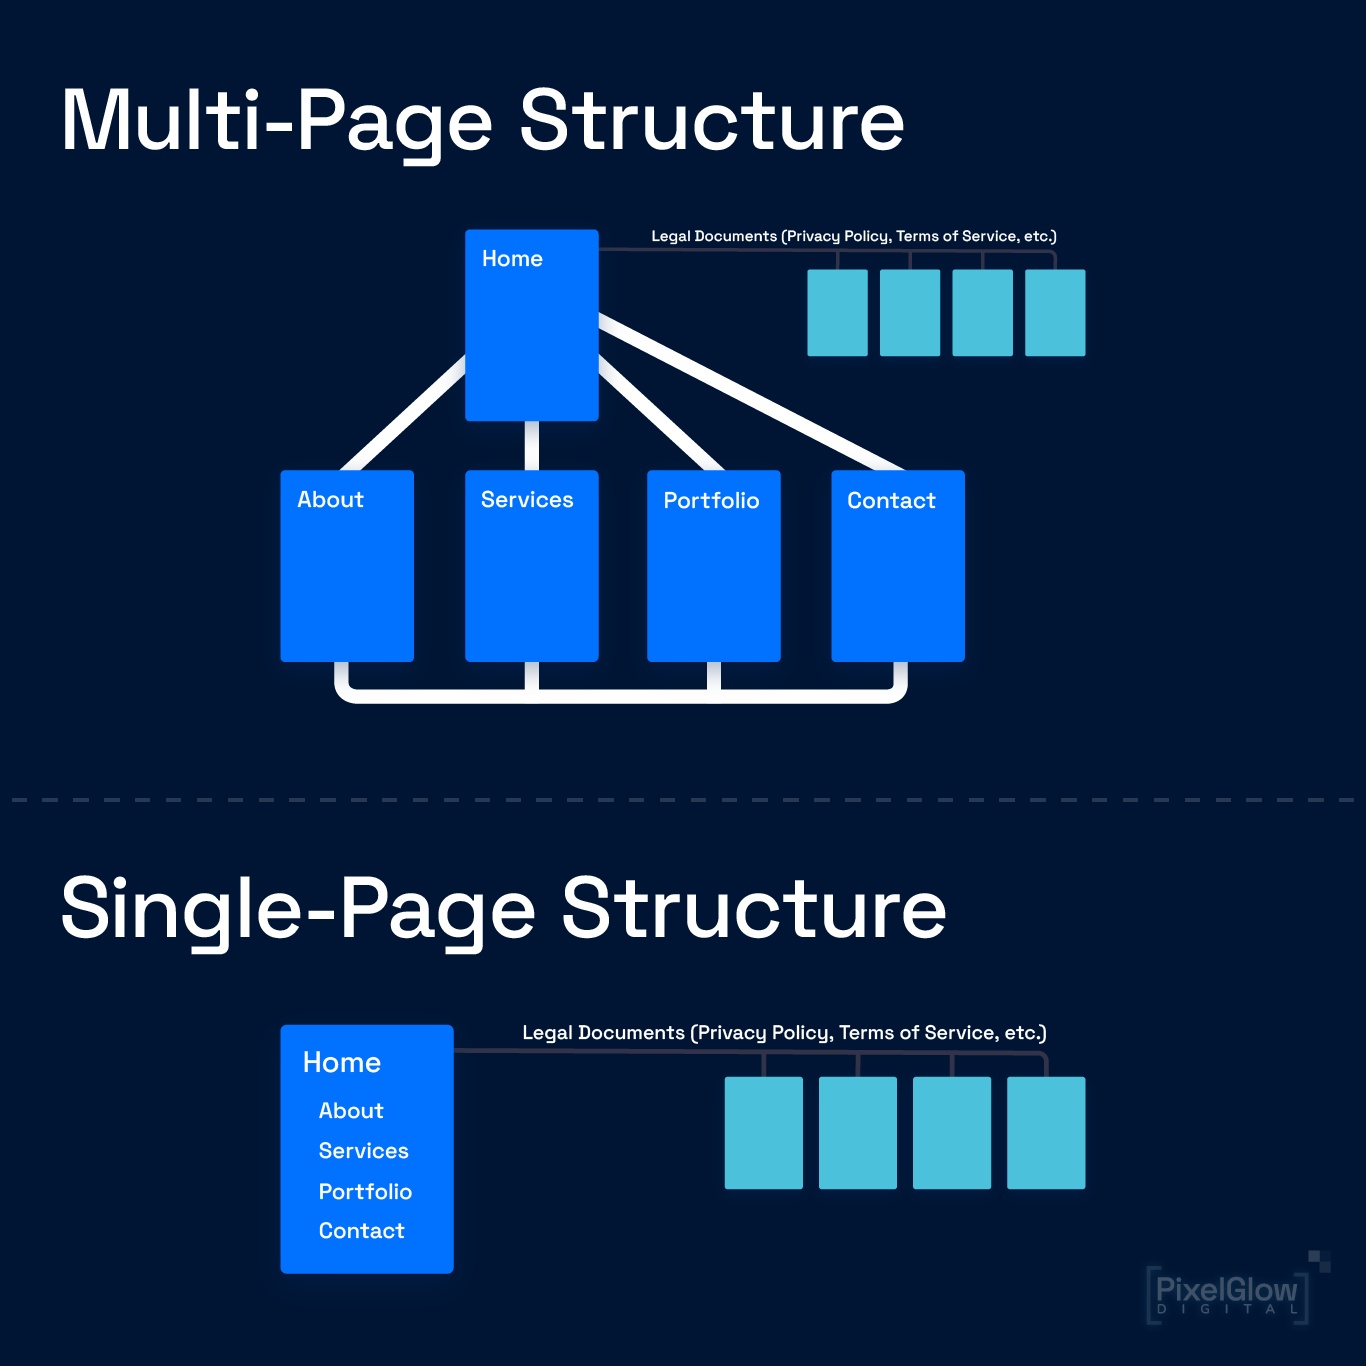 Infographic illustrating the differences in Multi-Page and Single-Page website Structures.